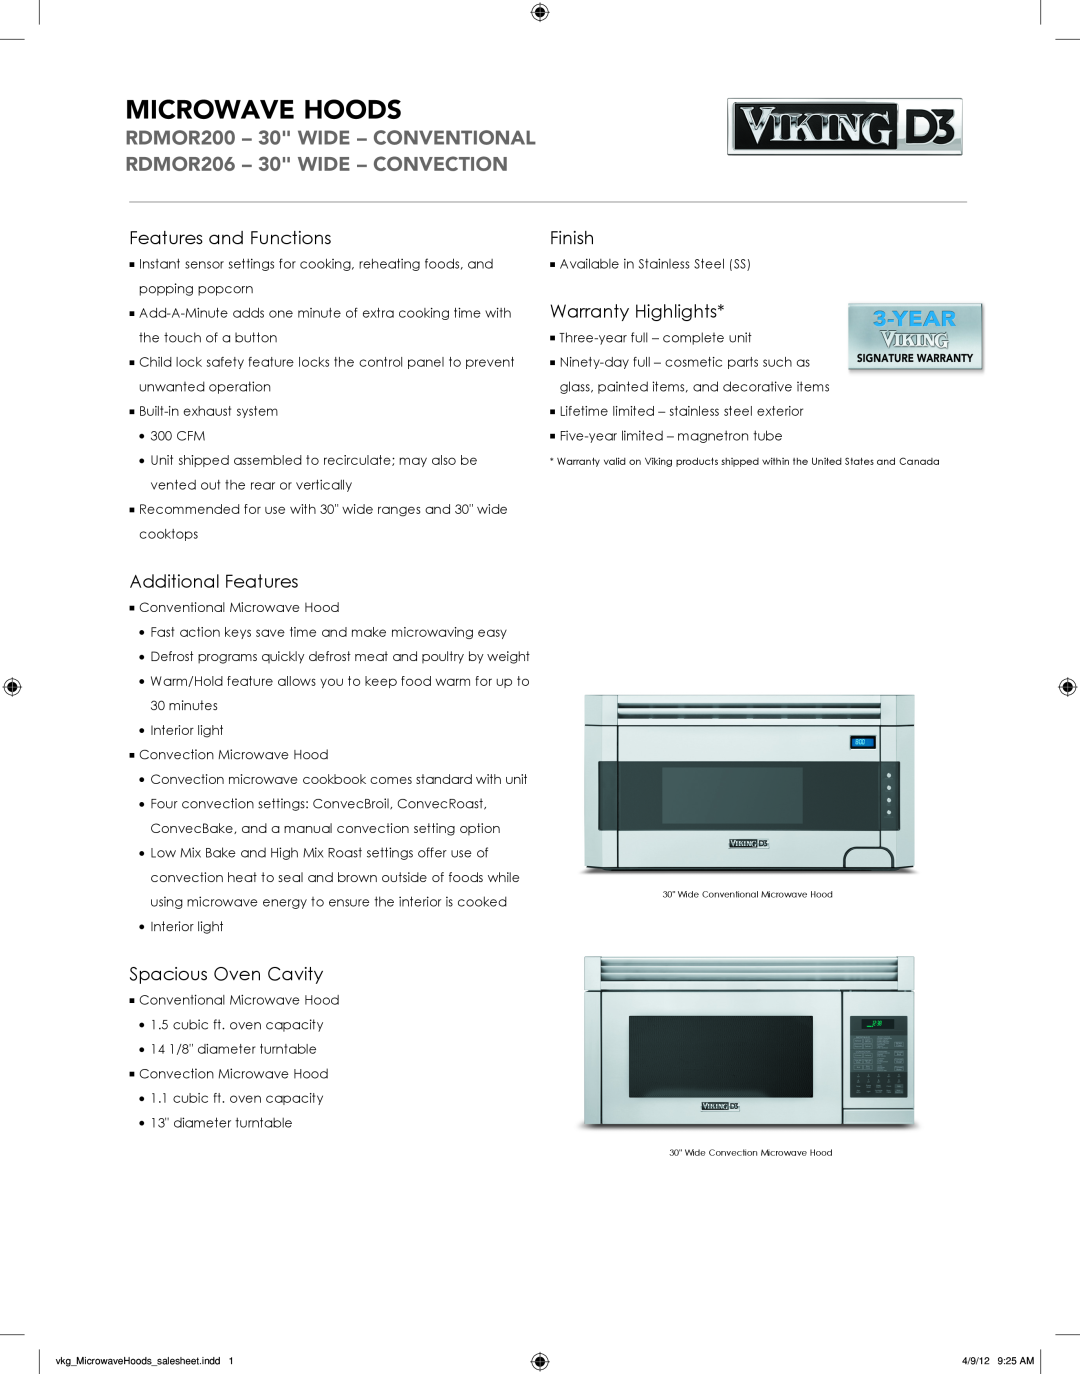 Viking warranty Microwave Hoods, RDMOR200 - 30 wide - Conventional RDMOR206 - 30 WIDE - CONVECTION, Finish 